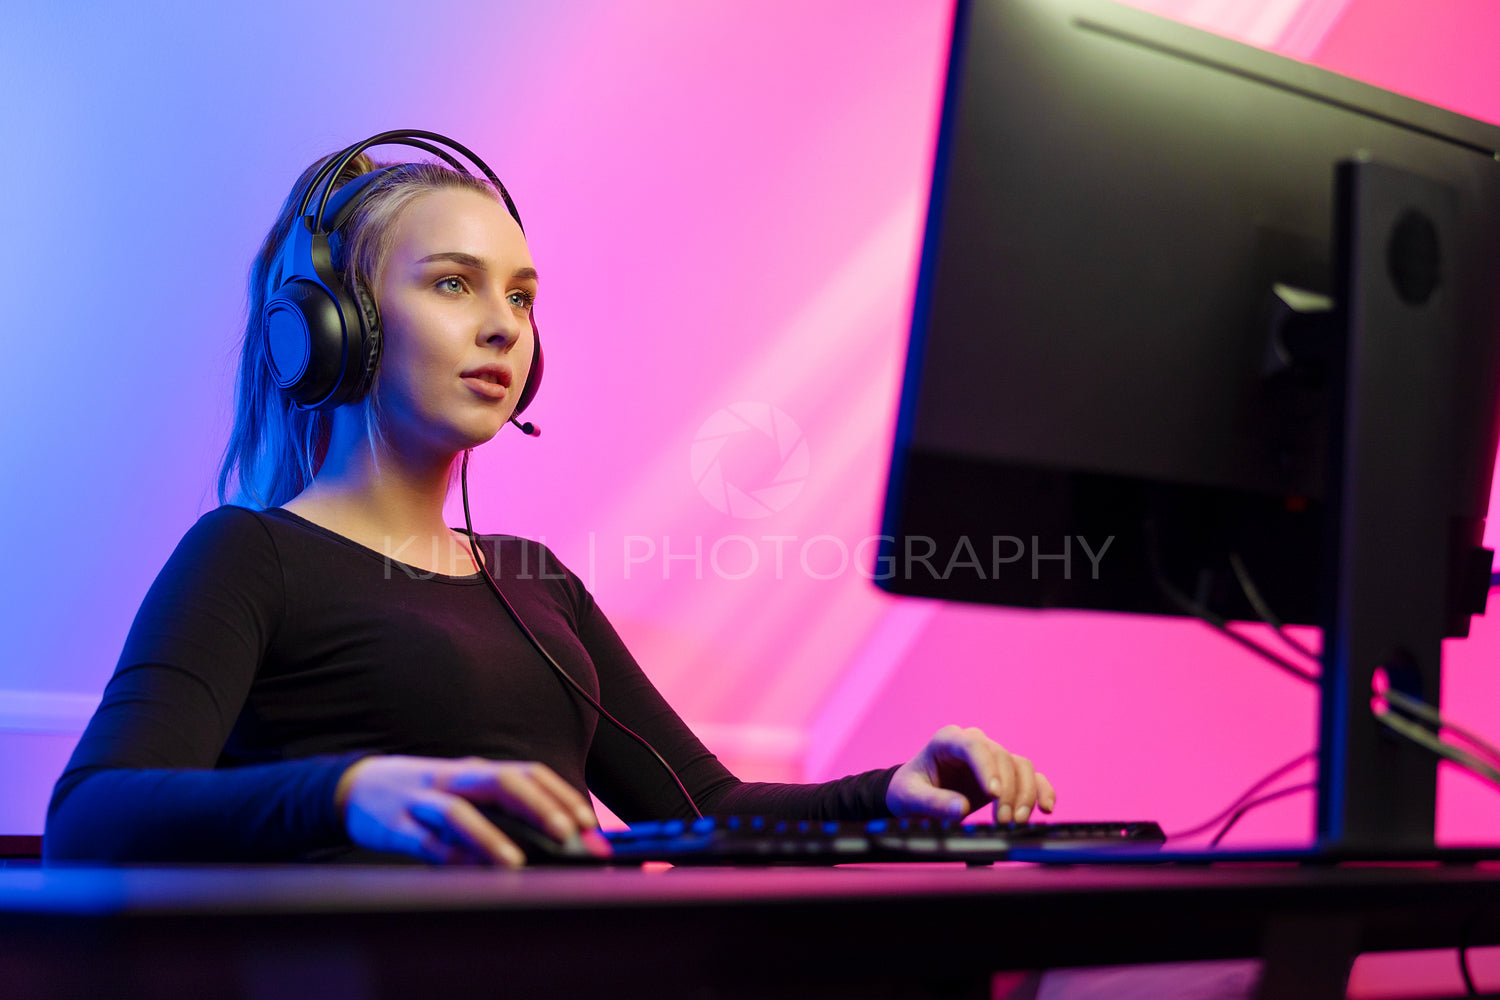 Focused Gamer Girl with Headset Playing Online Video Game on PC